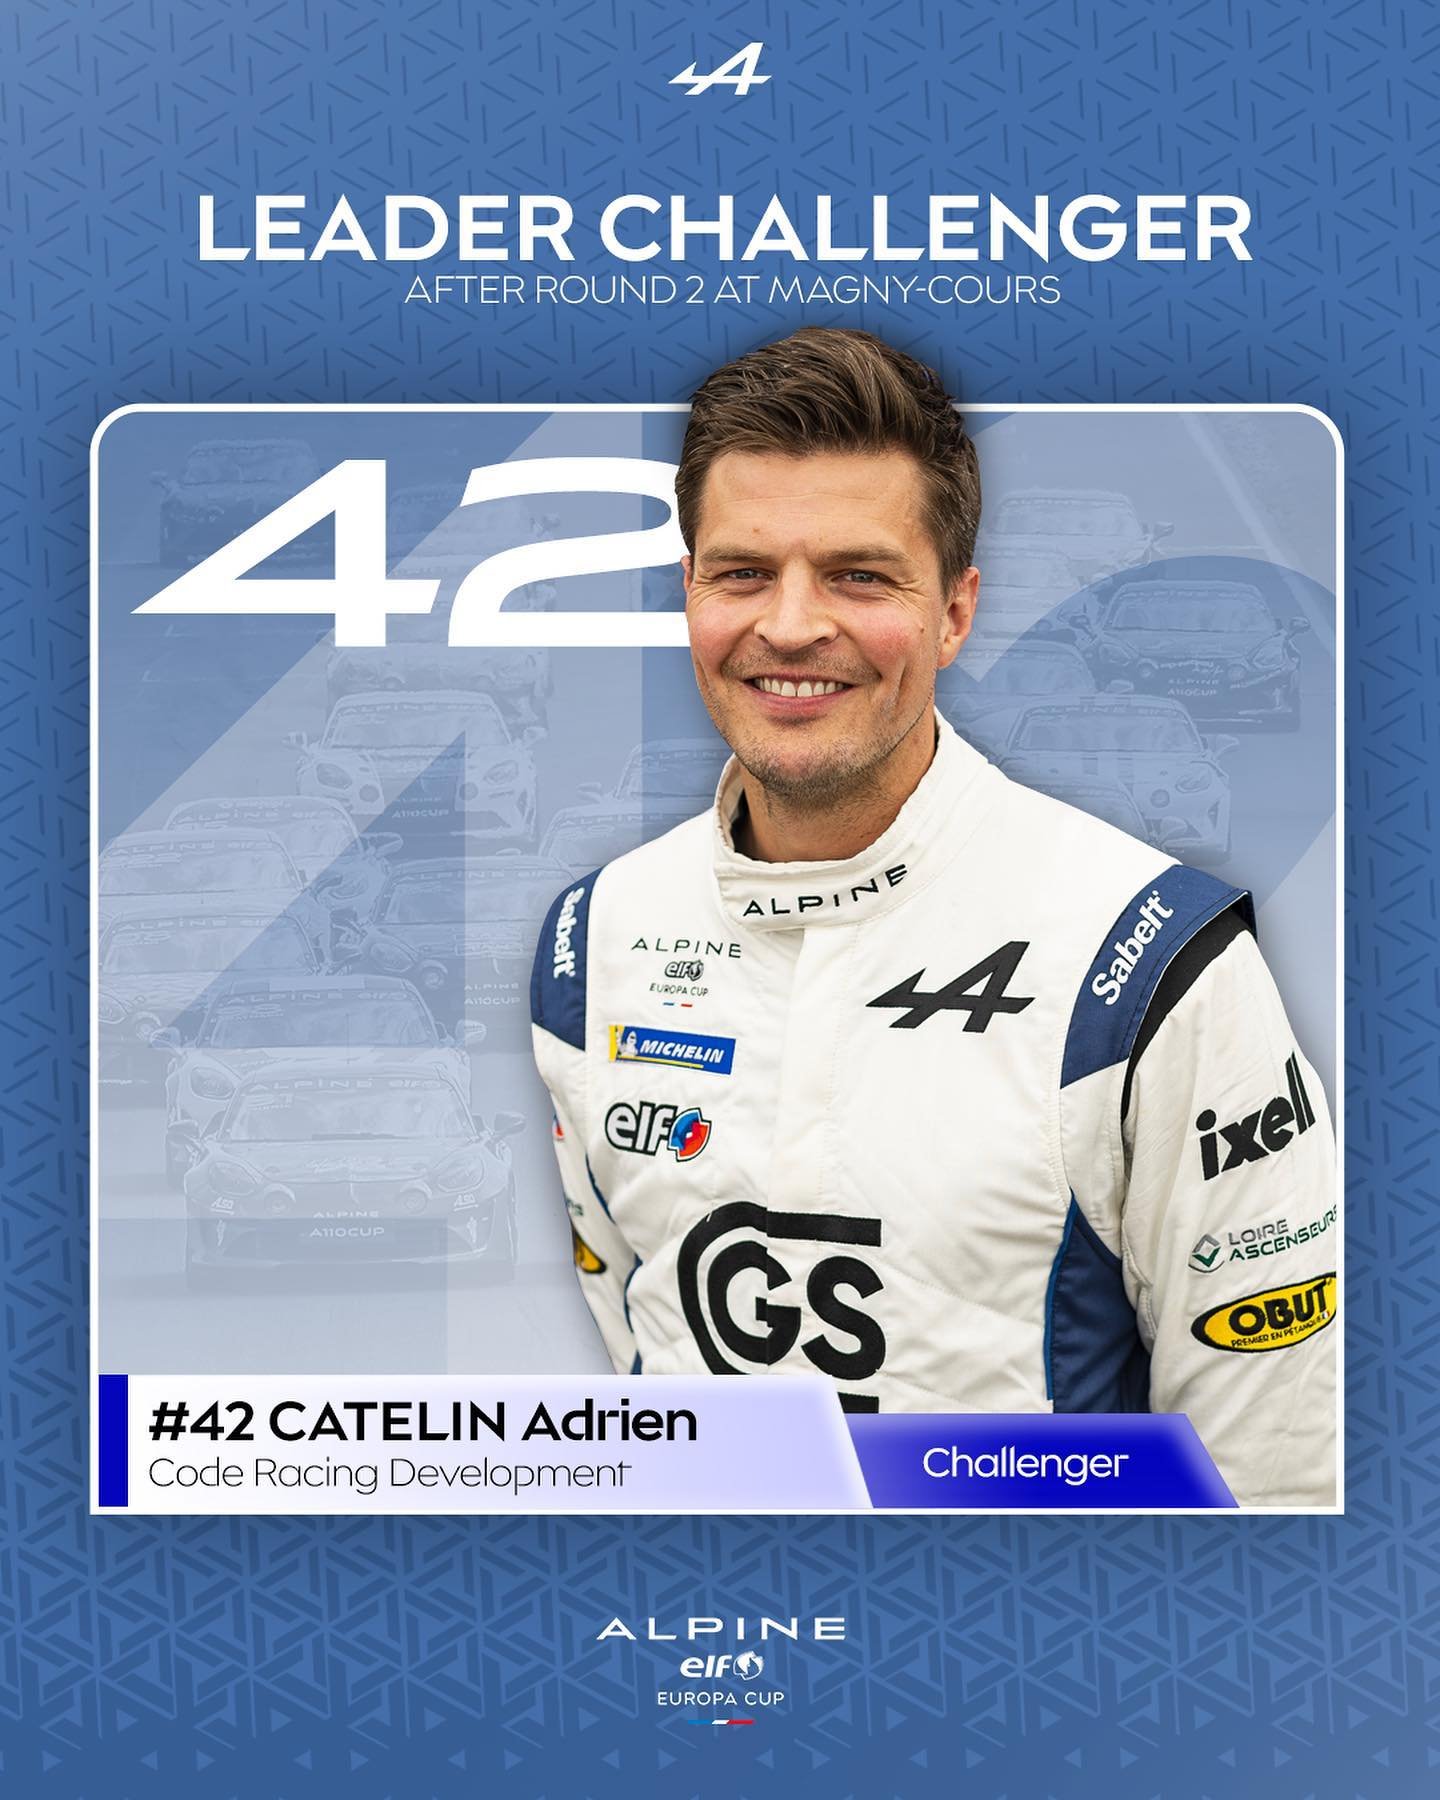 A110 Cup apres magny cours leader challenger